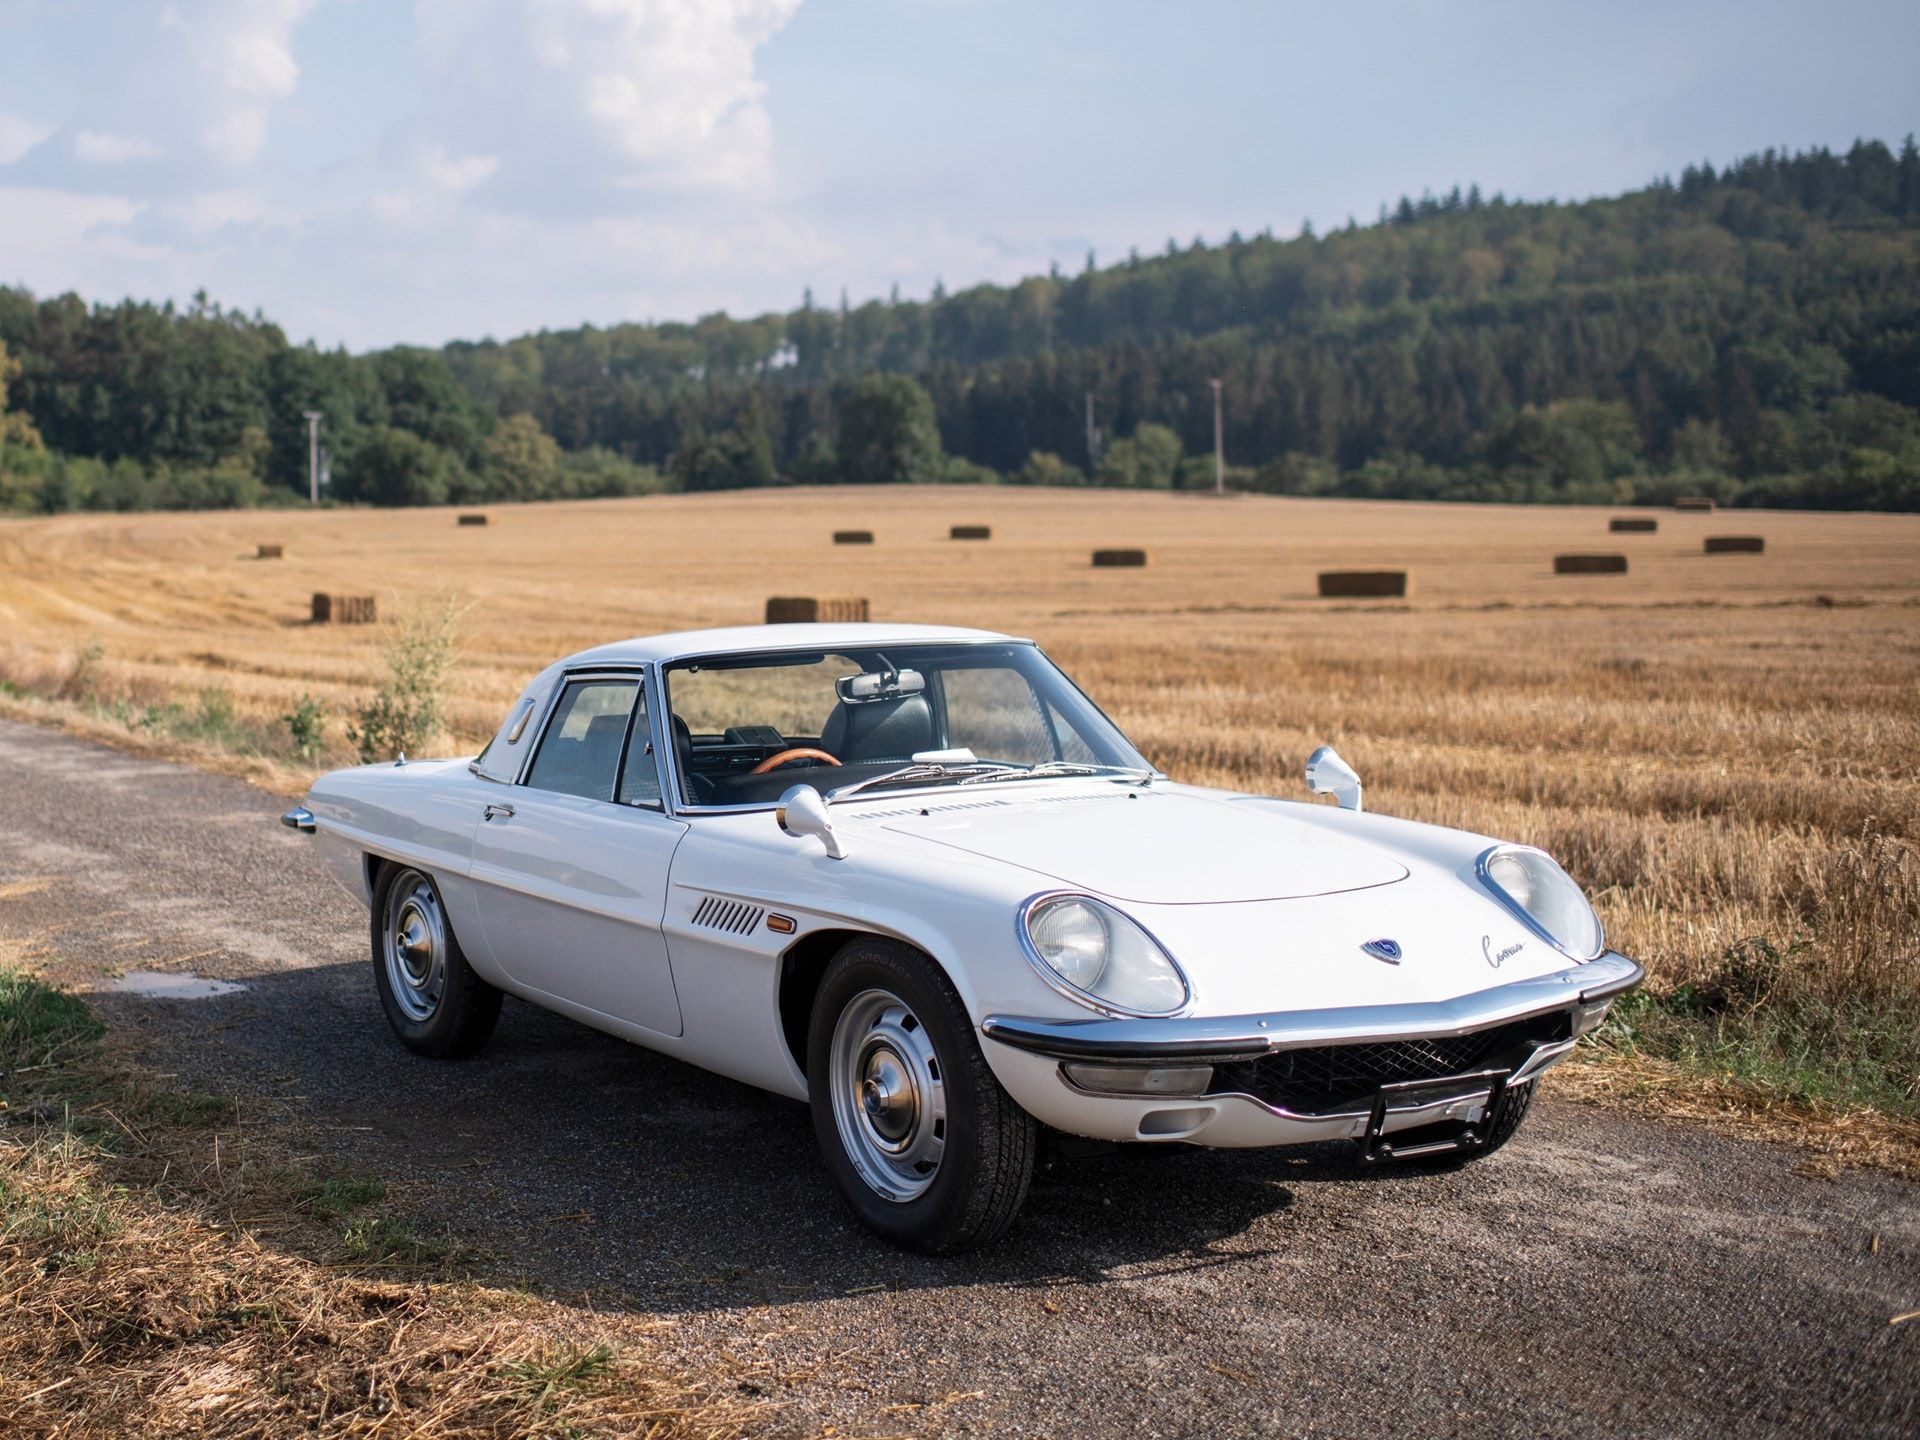 Mazda Built Its First Sports Car In 1967